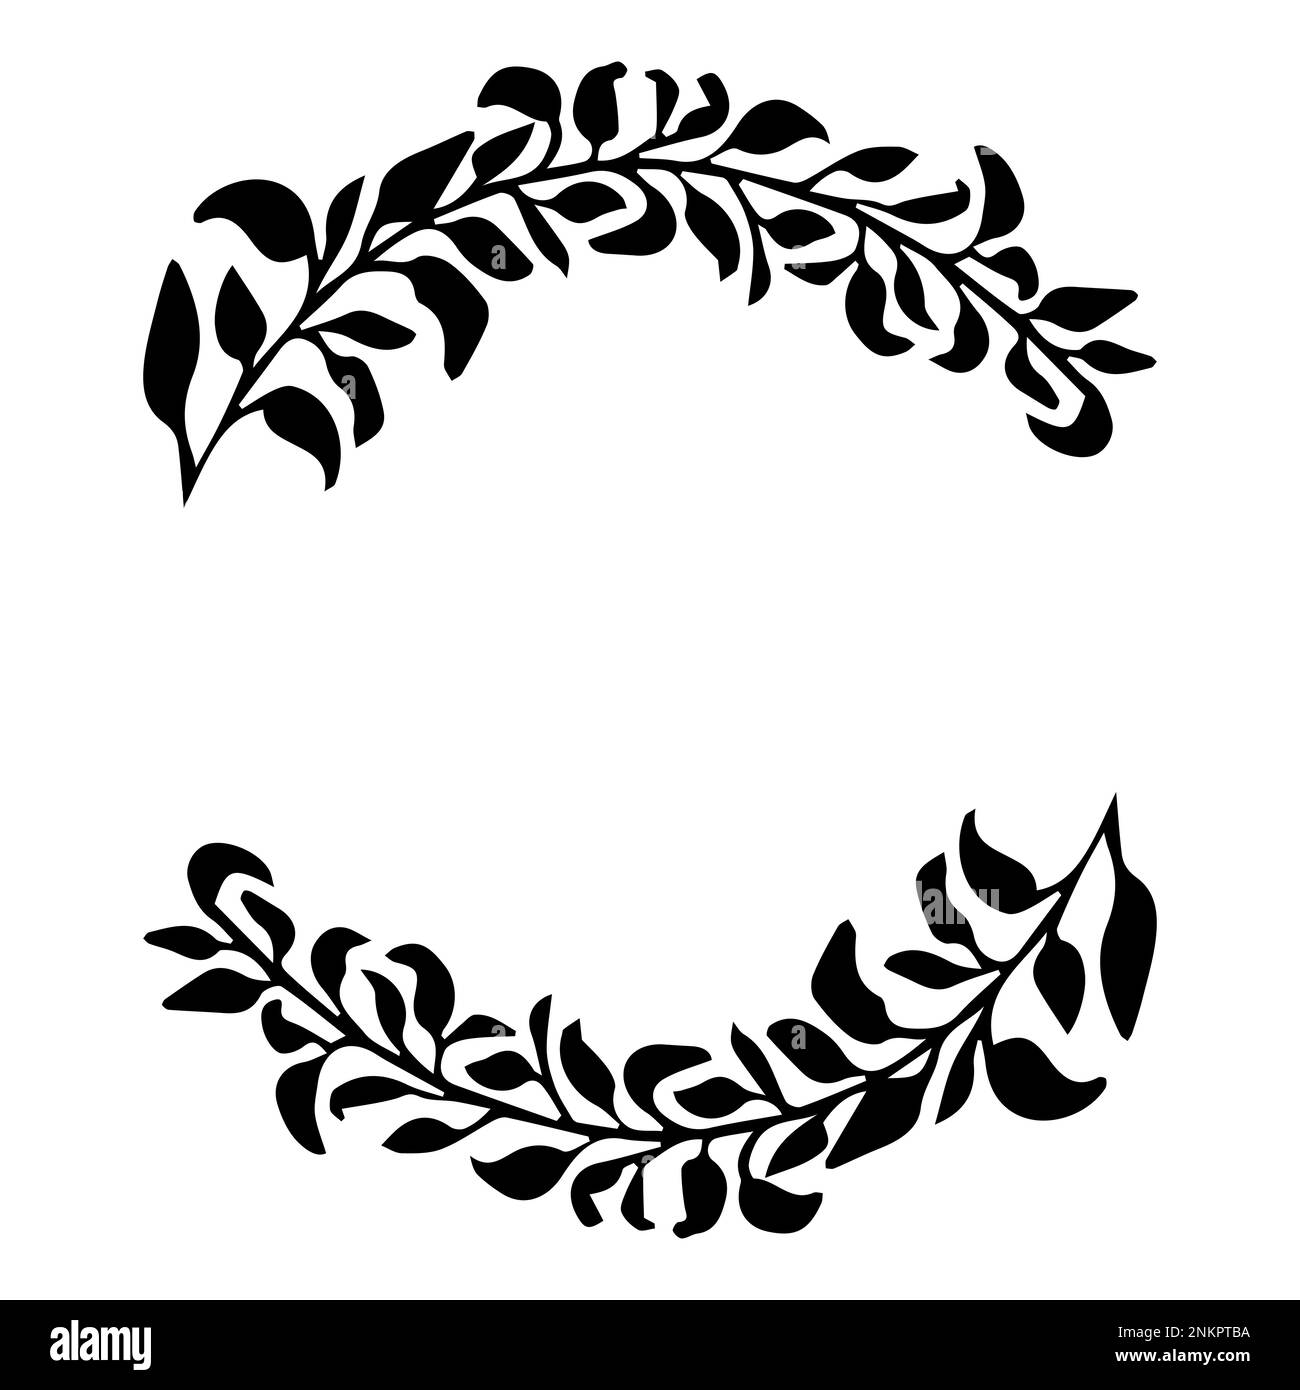 Digital Green Vines Clip Art. Green Laurel Wreath and Leaves Clipart. Vine  Frames and Borders for Wedding, Cards Dainty Green Vines 